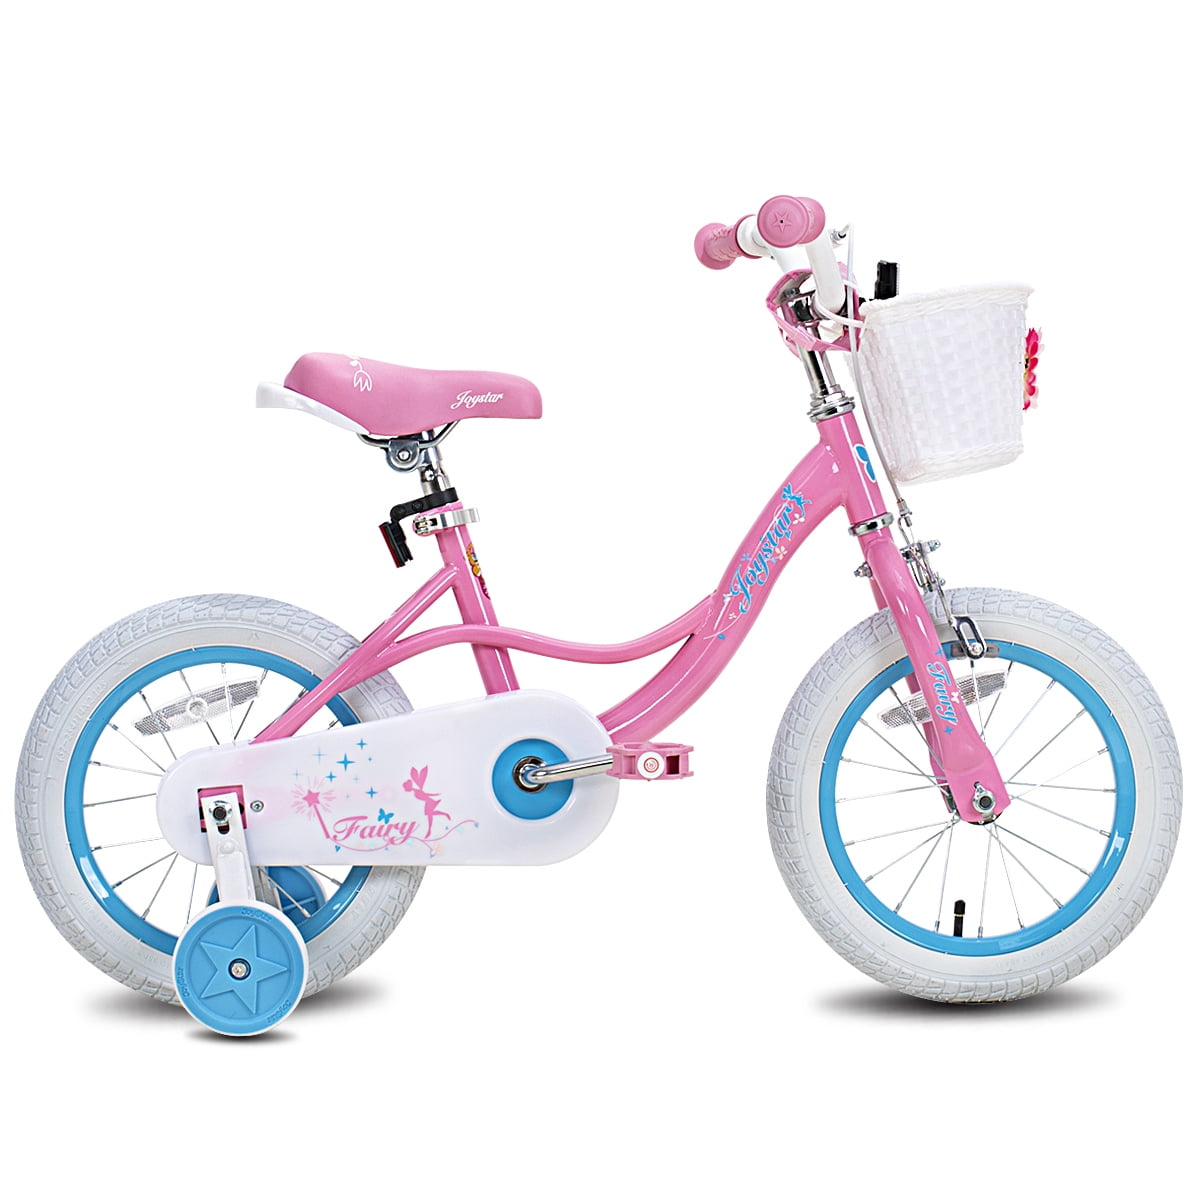 JOYSTAR 14 Inch Pink Kids Bike for 4-6 Years Girls Kids Bicycle with Front Basket & Training Wheels DRBIKE